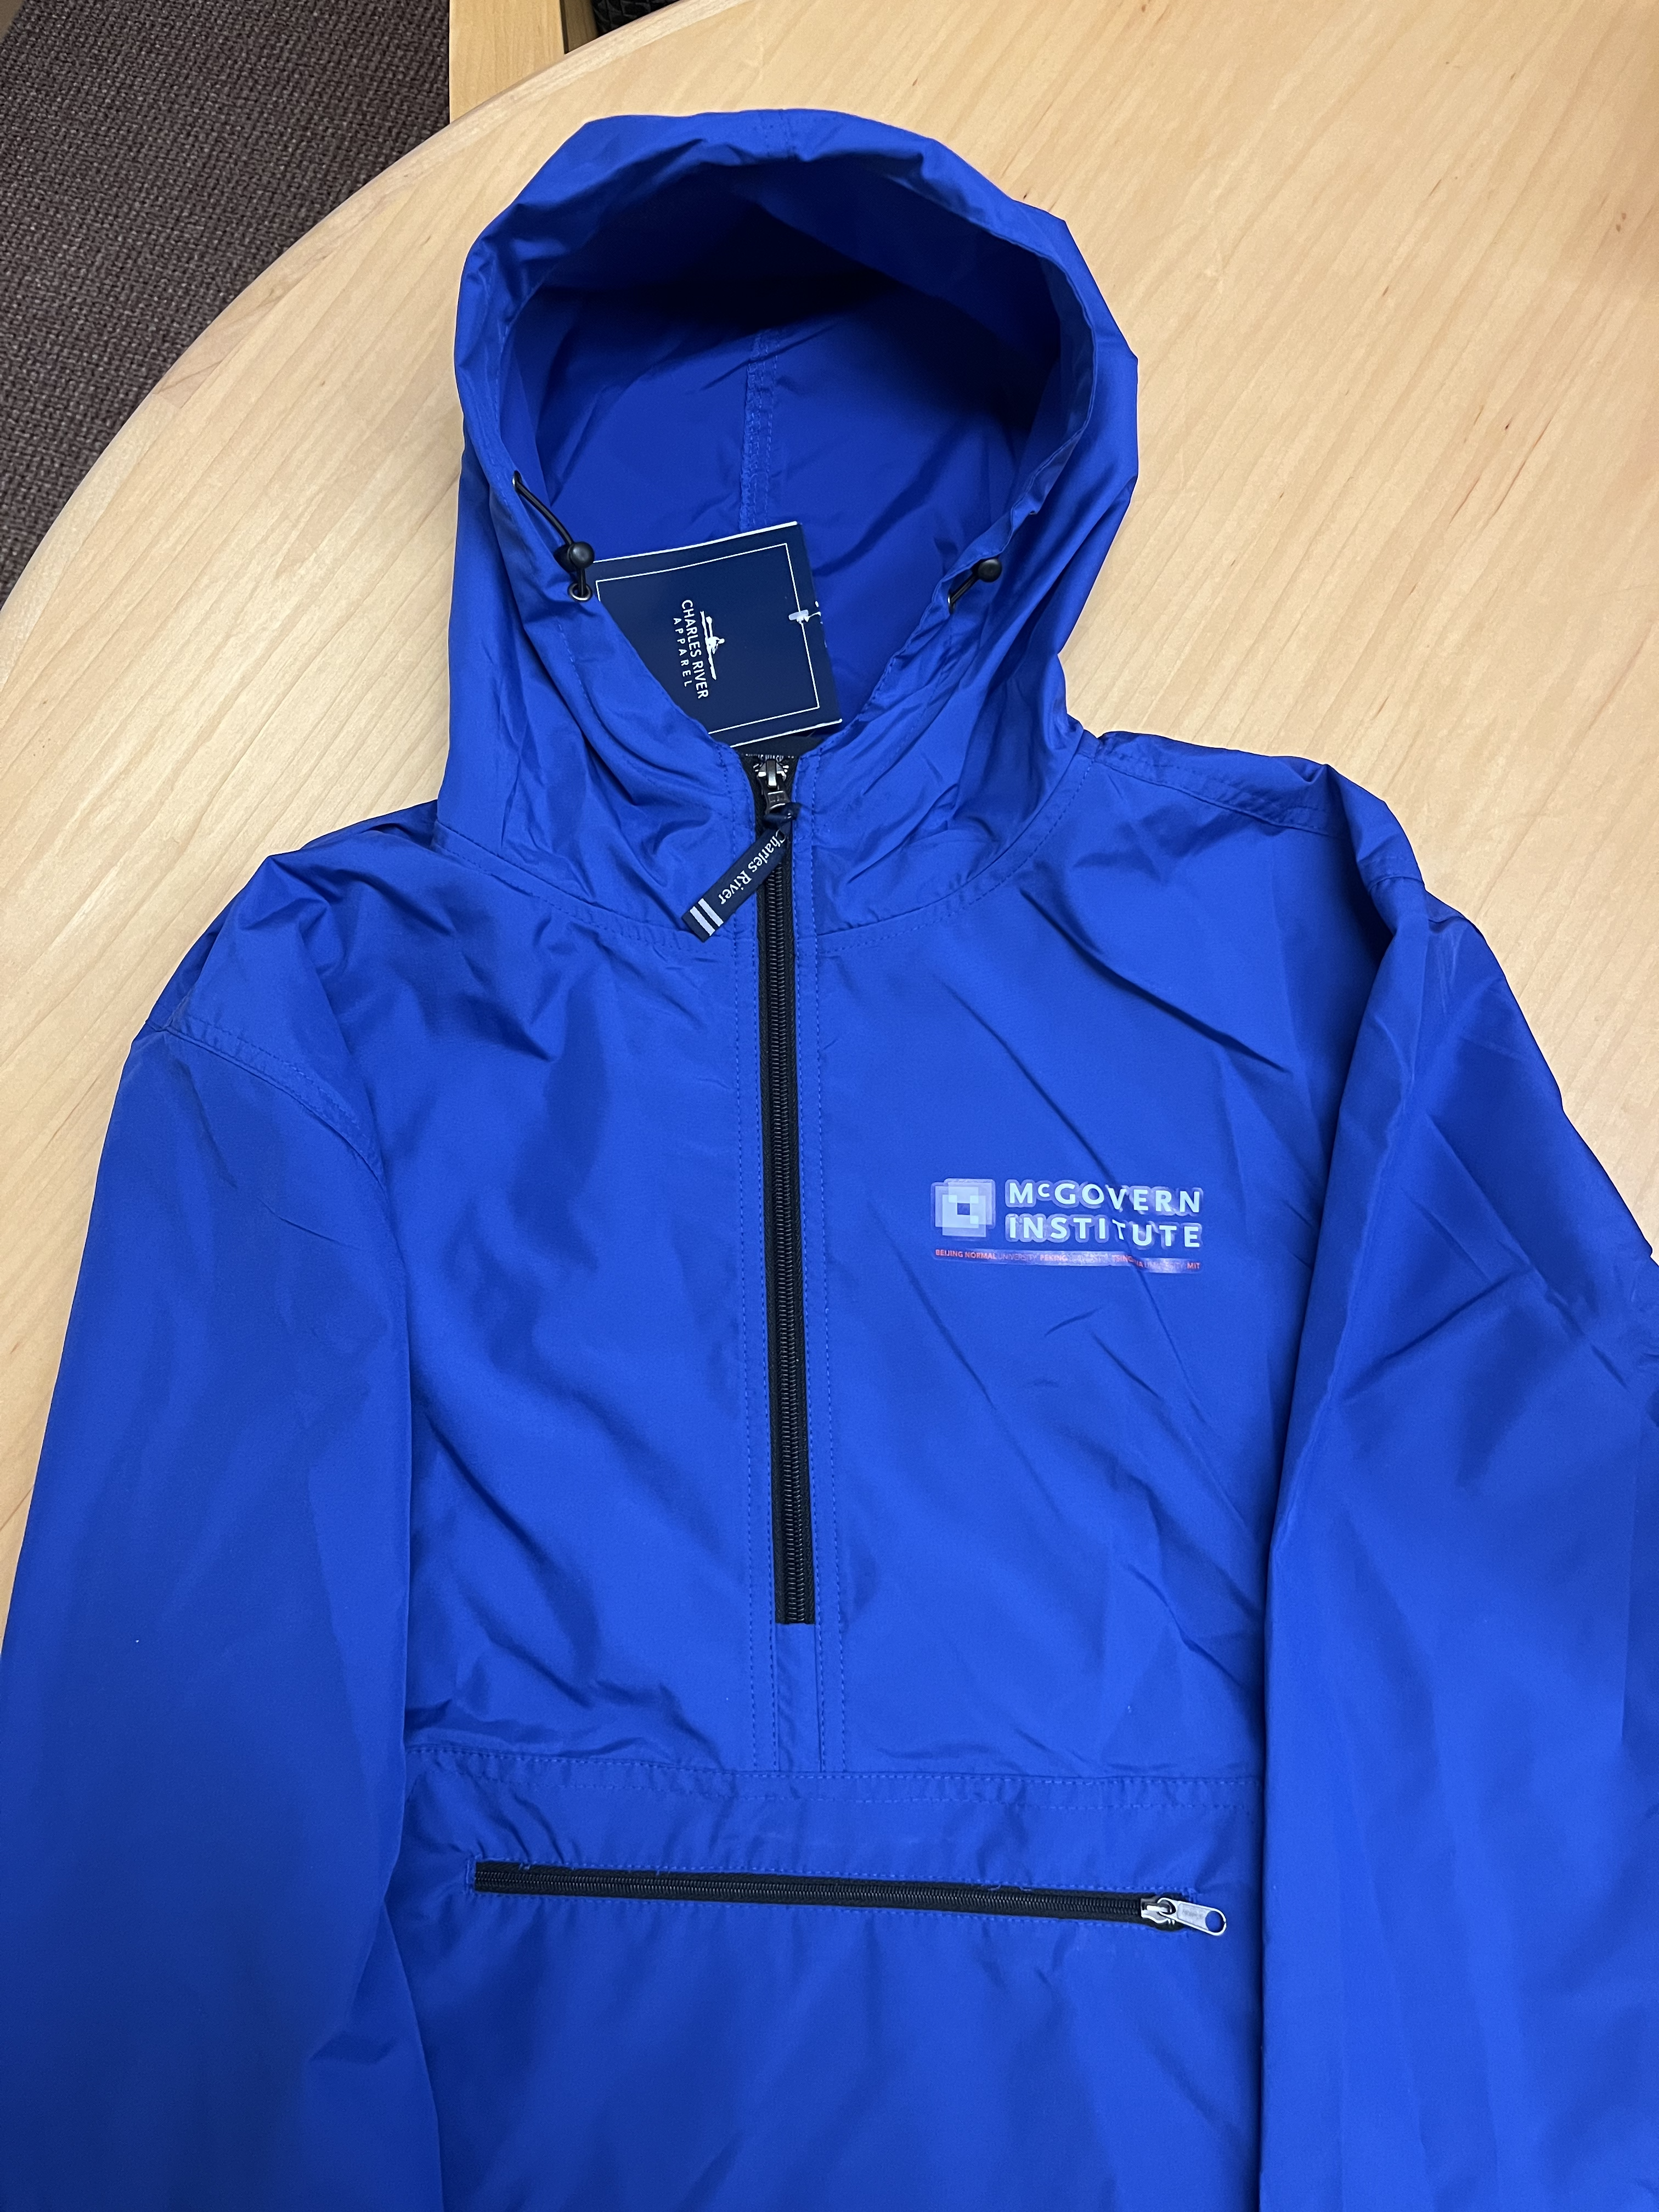 Charles River Apparel Windbreaker (with names of McGovern Institutes in China)